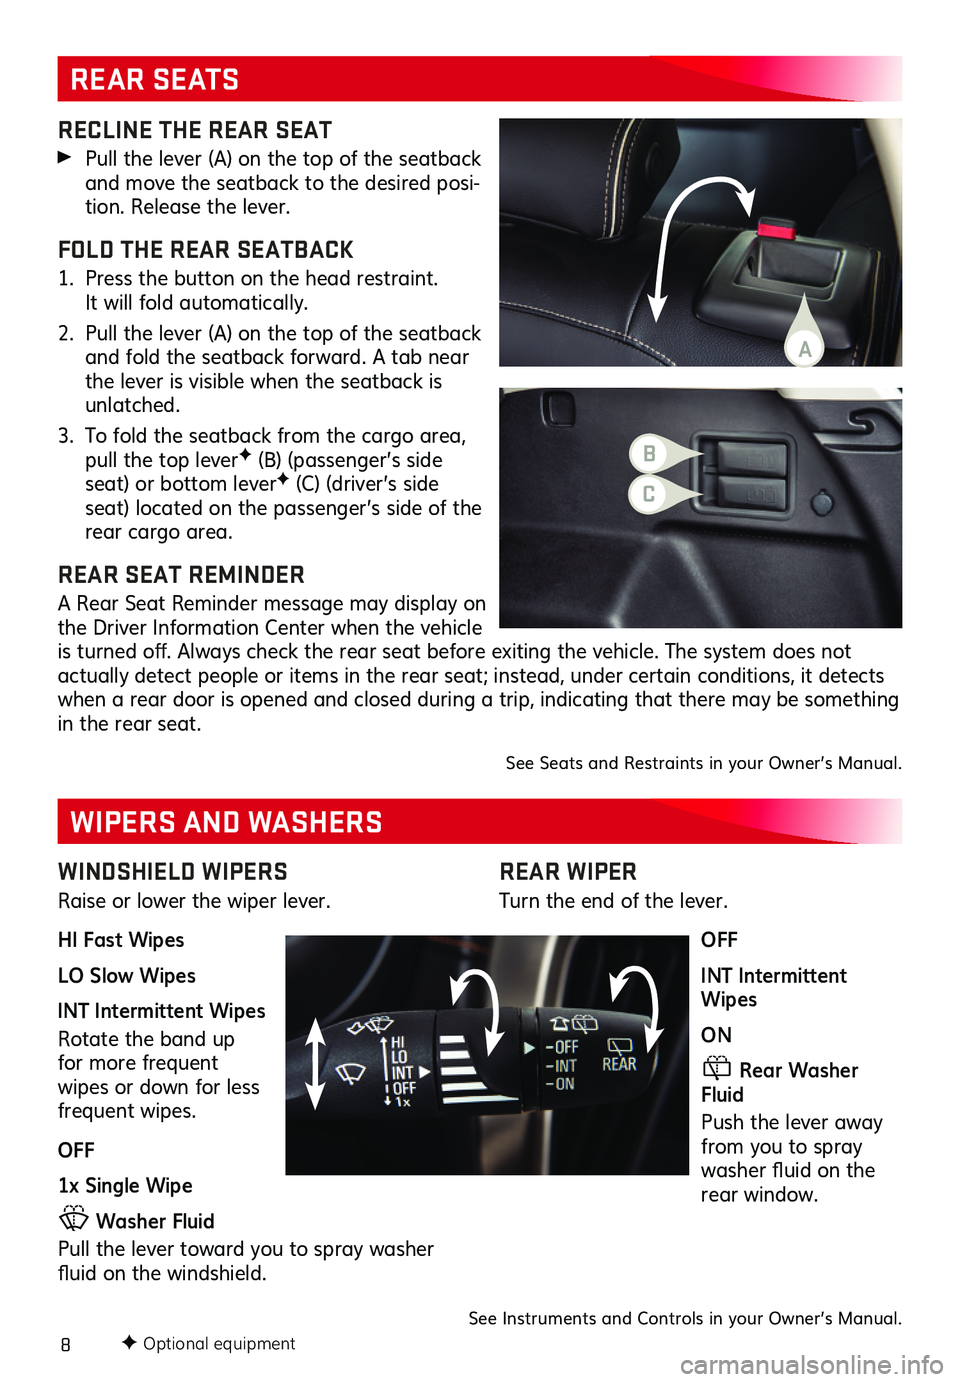 GMC TERRAIN 2021  Get To Know Guide 8
REAR WIPER
Turn the end of the lever.
OFF
INT Intermittent Wipes
ON
 Rear Washer Fluid
Push the lever away from you to spray washer fluid on the rear window.
RECLINE THE REAR SEAT
 Pull the lever (A